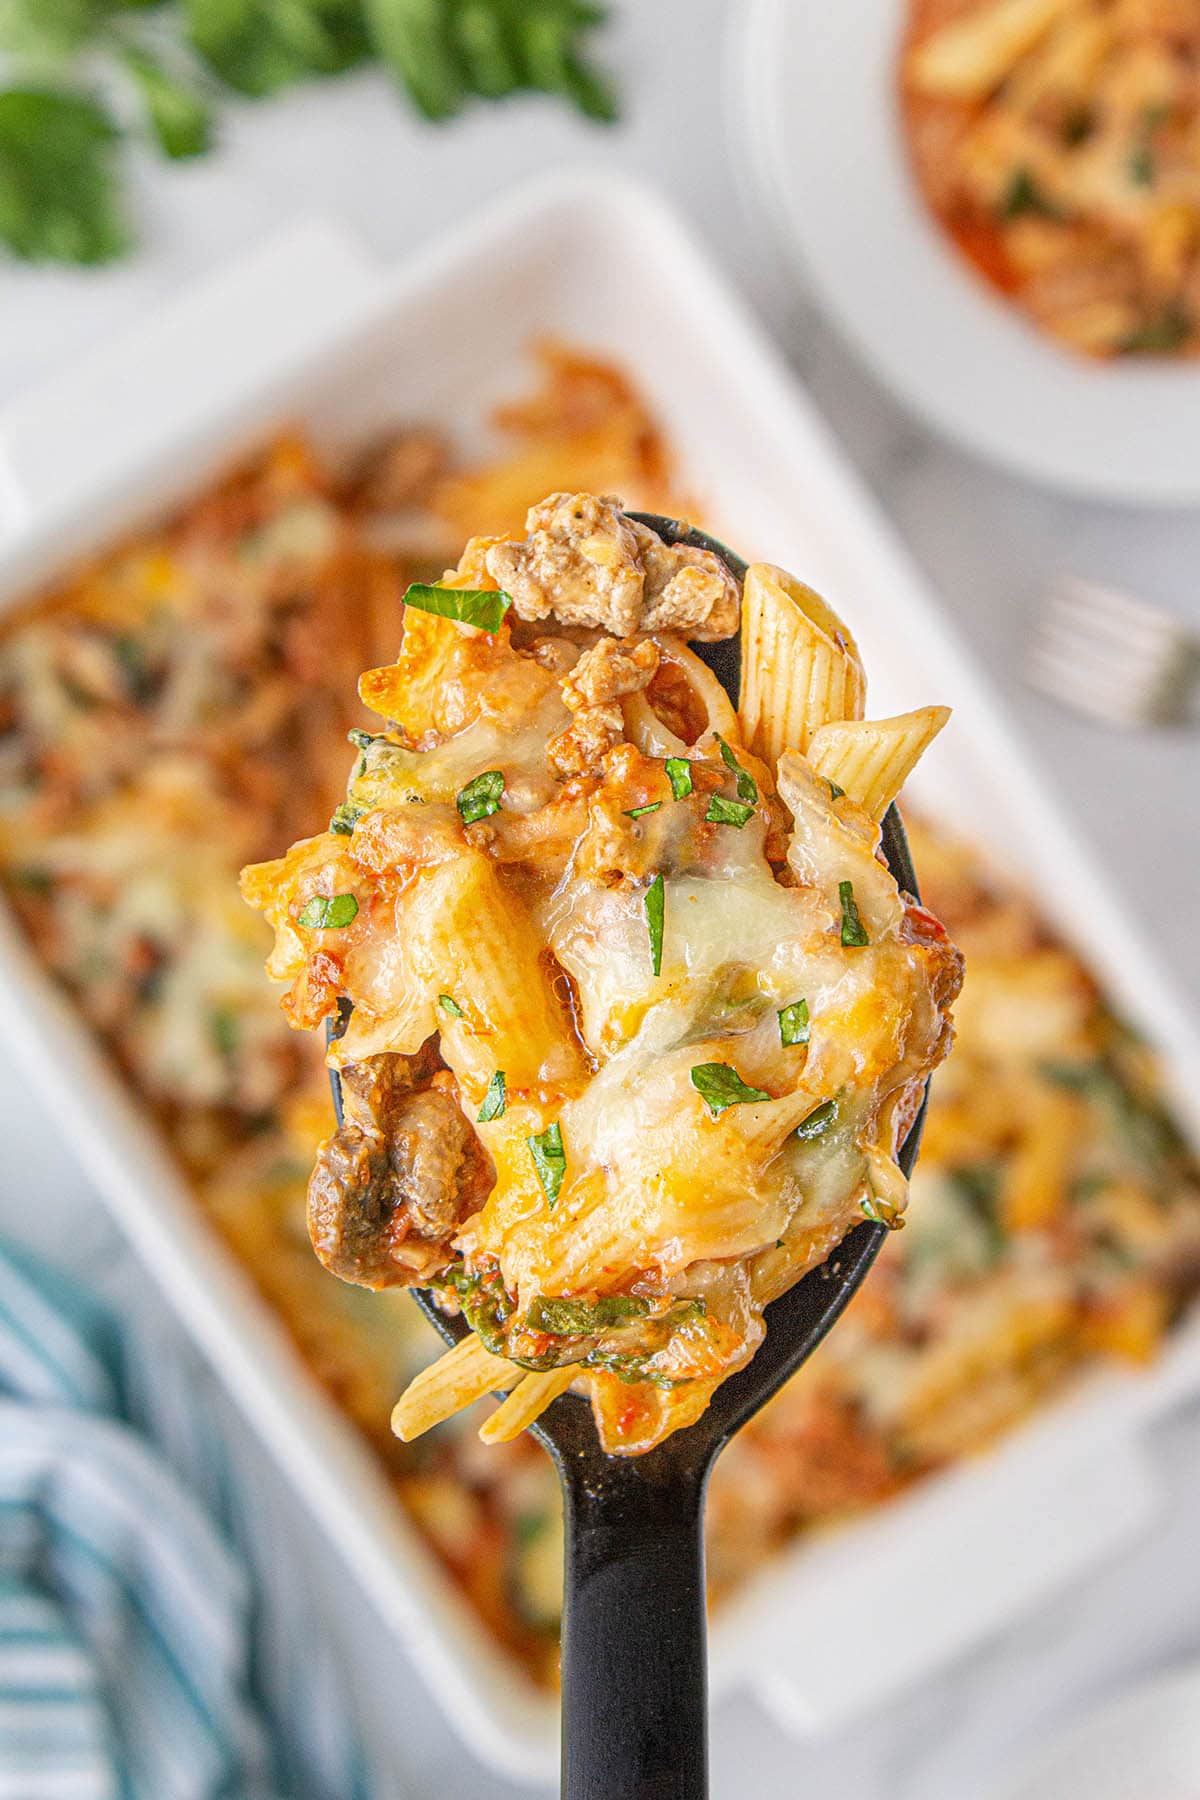 Ground Turkey Casserole in a baking dish with a spoon scooping up a serving.